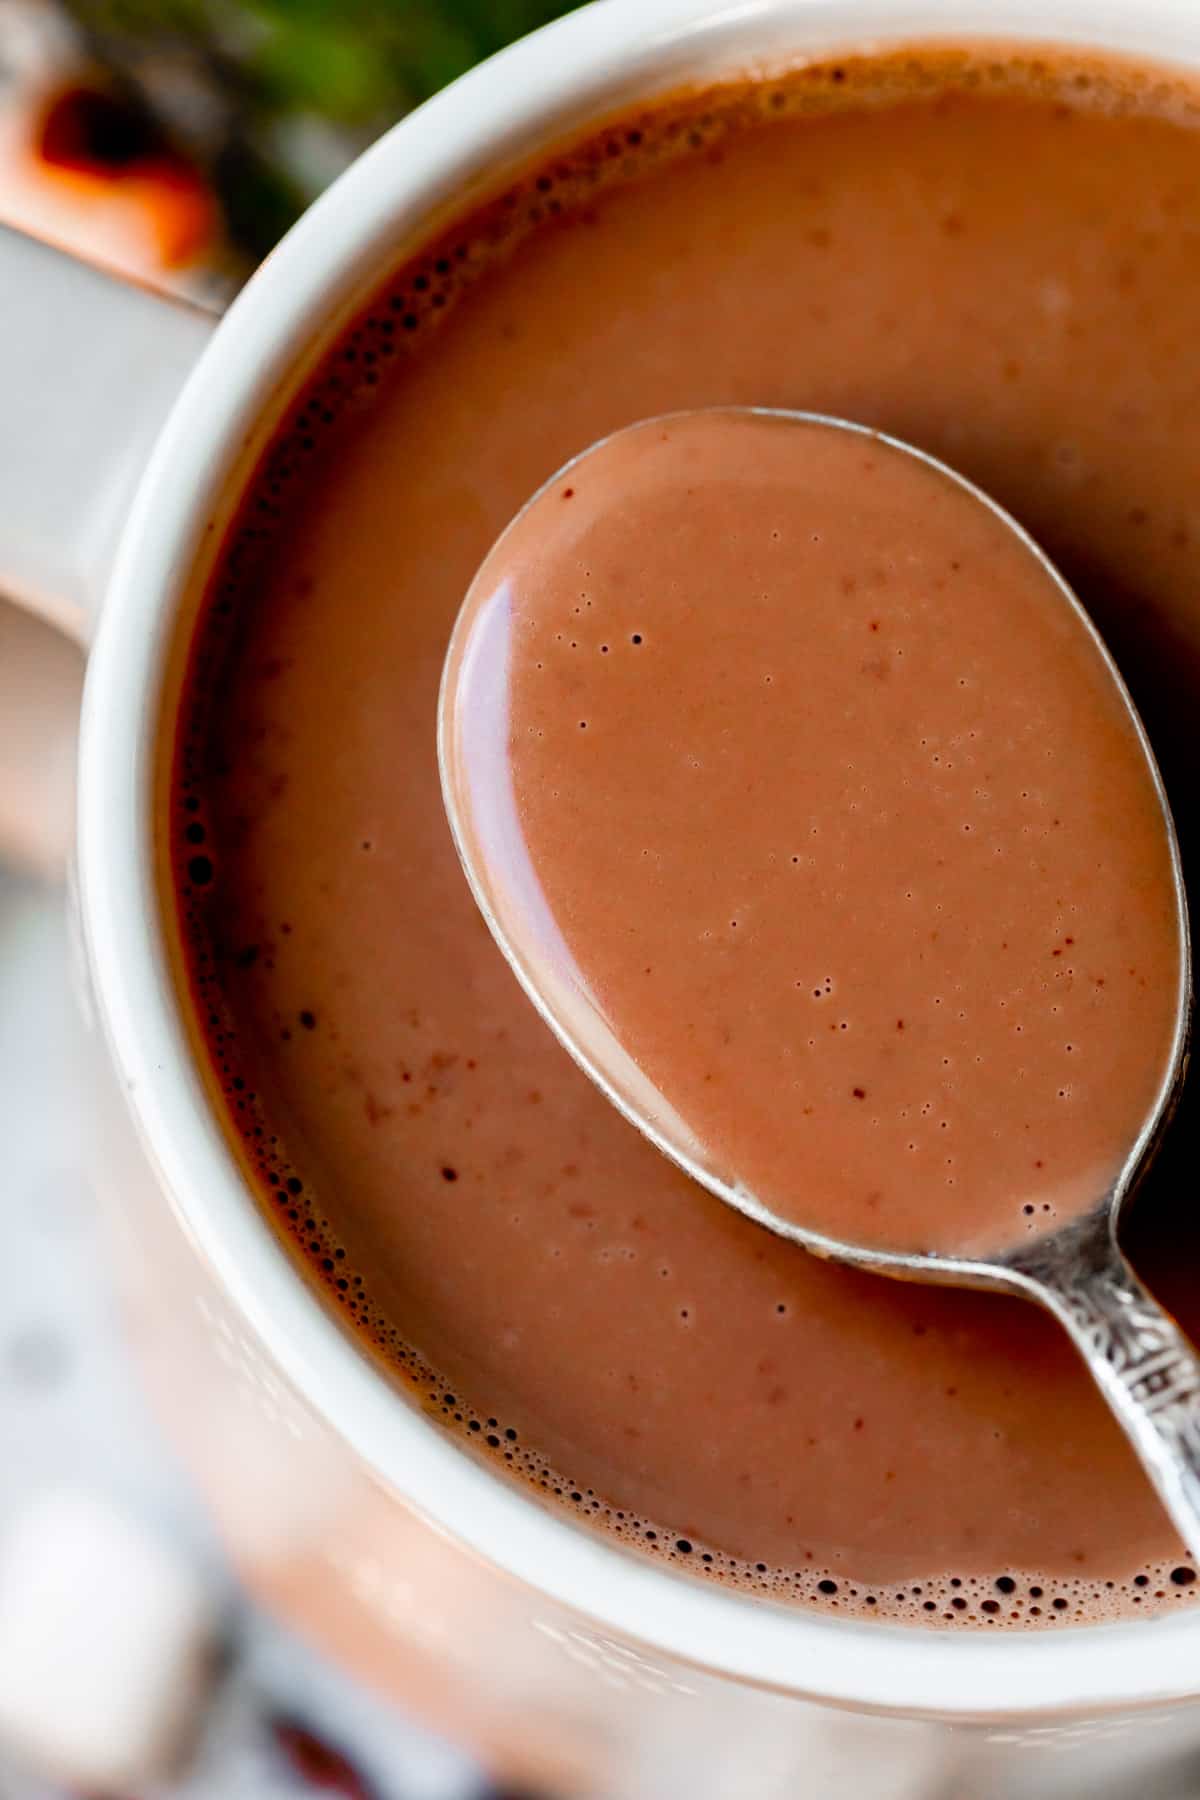 a spoonful of hot chocolate being lifted from a white mug.